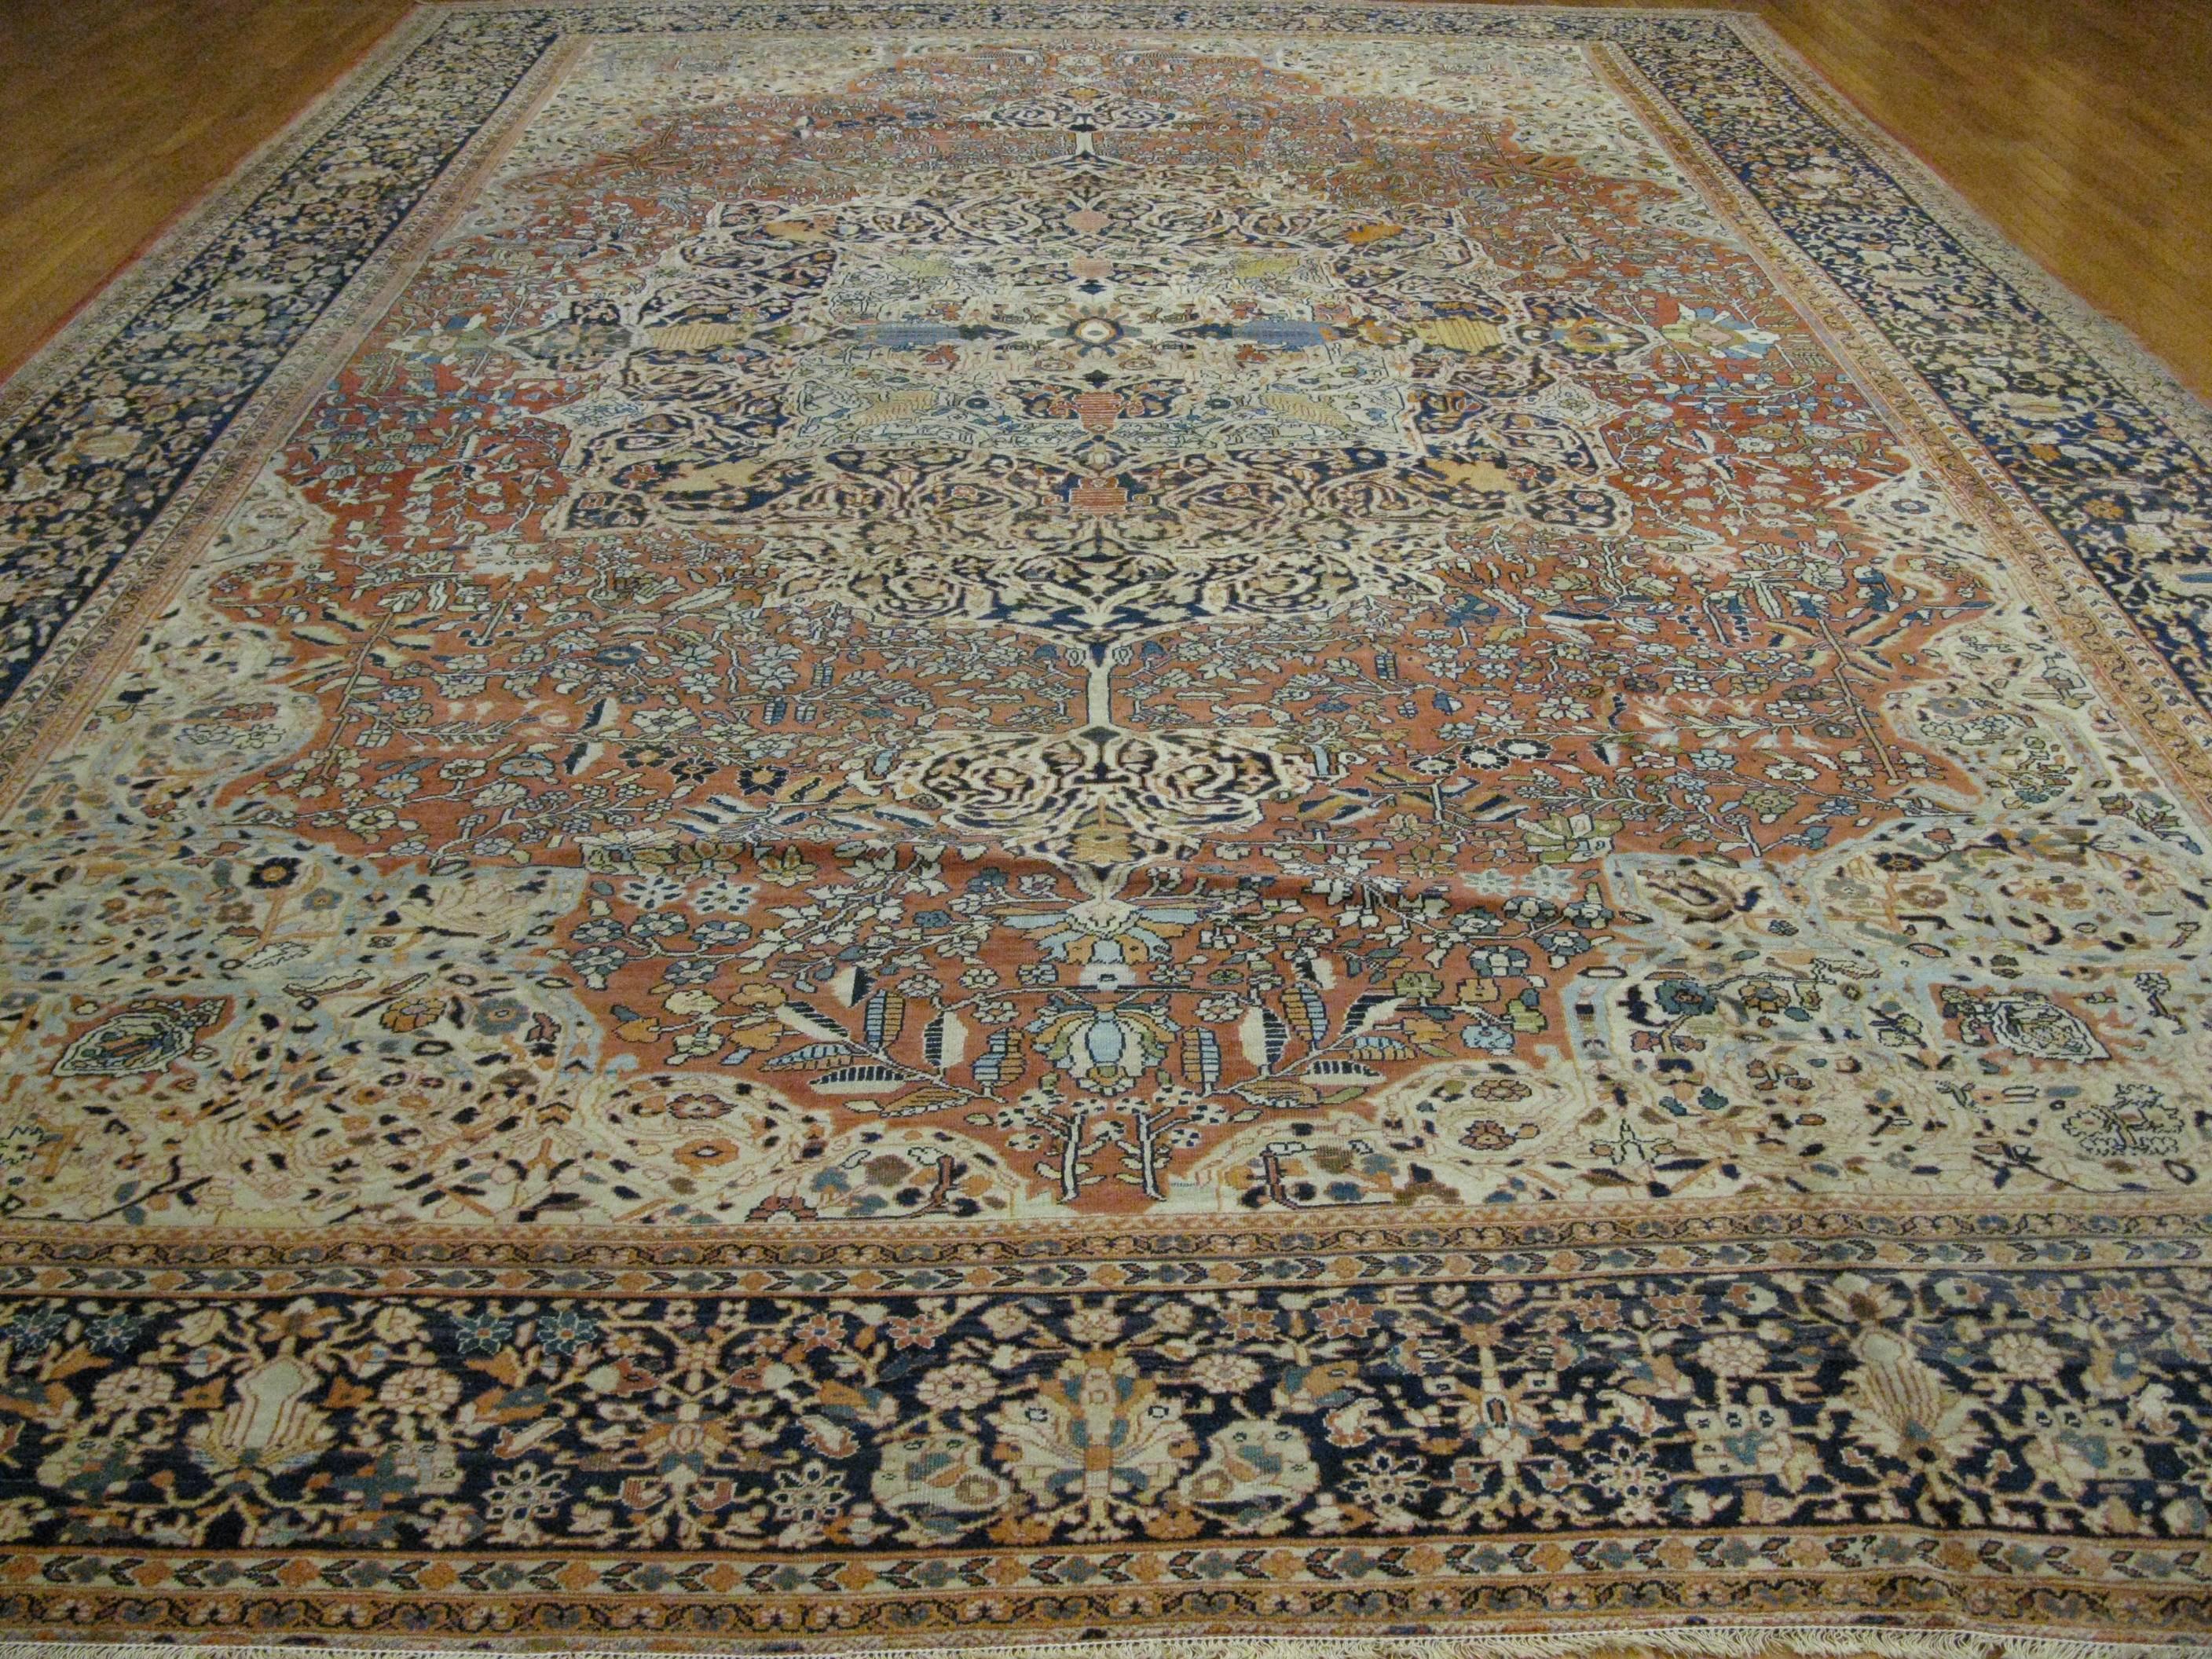 A fabulous antique hand-knotted Persian Sarouk Farahan of late 19th century. It has a traditional detailed pattern made with fine wool on a cotton foundation colored with all natural dyes. It measures 12' 8